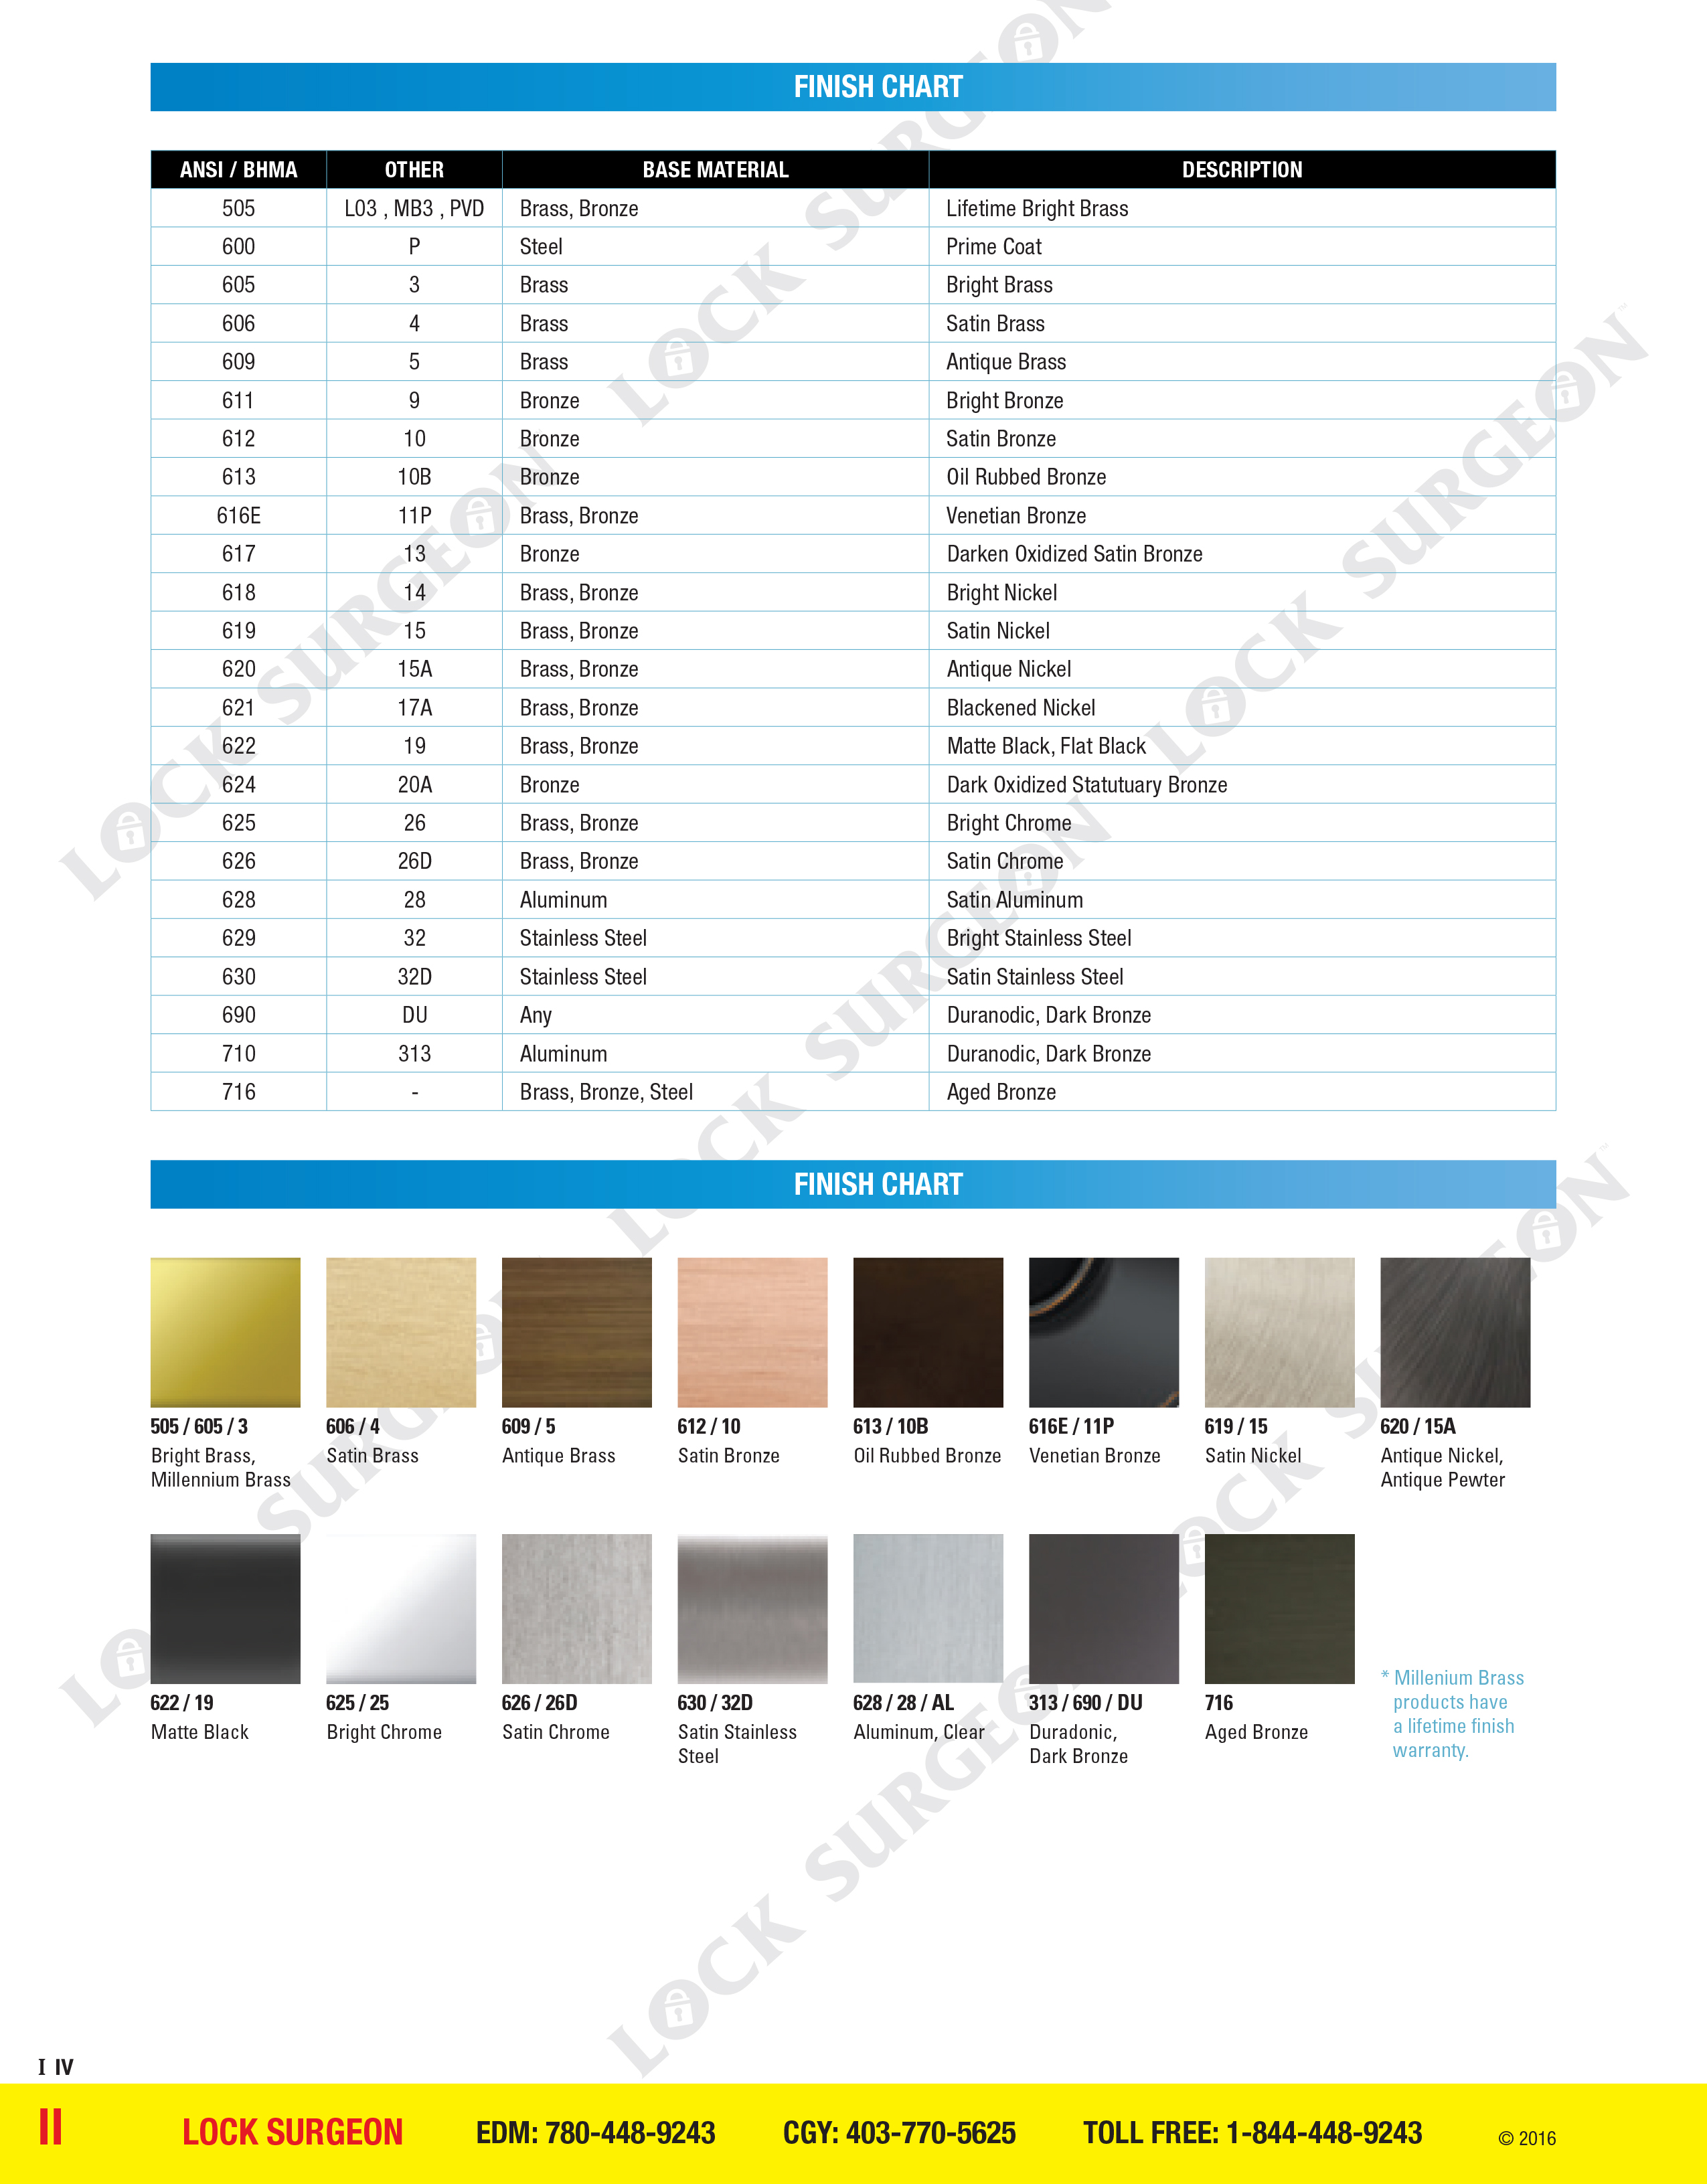 Colour reference chart for colour finishes on door handle hardware products Edmonton.